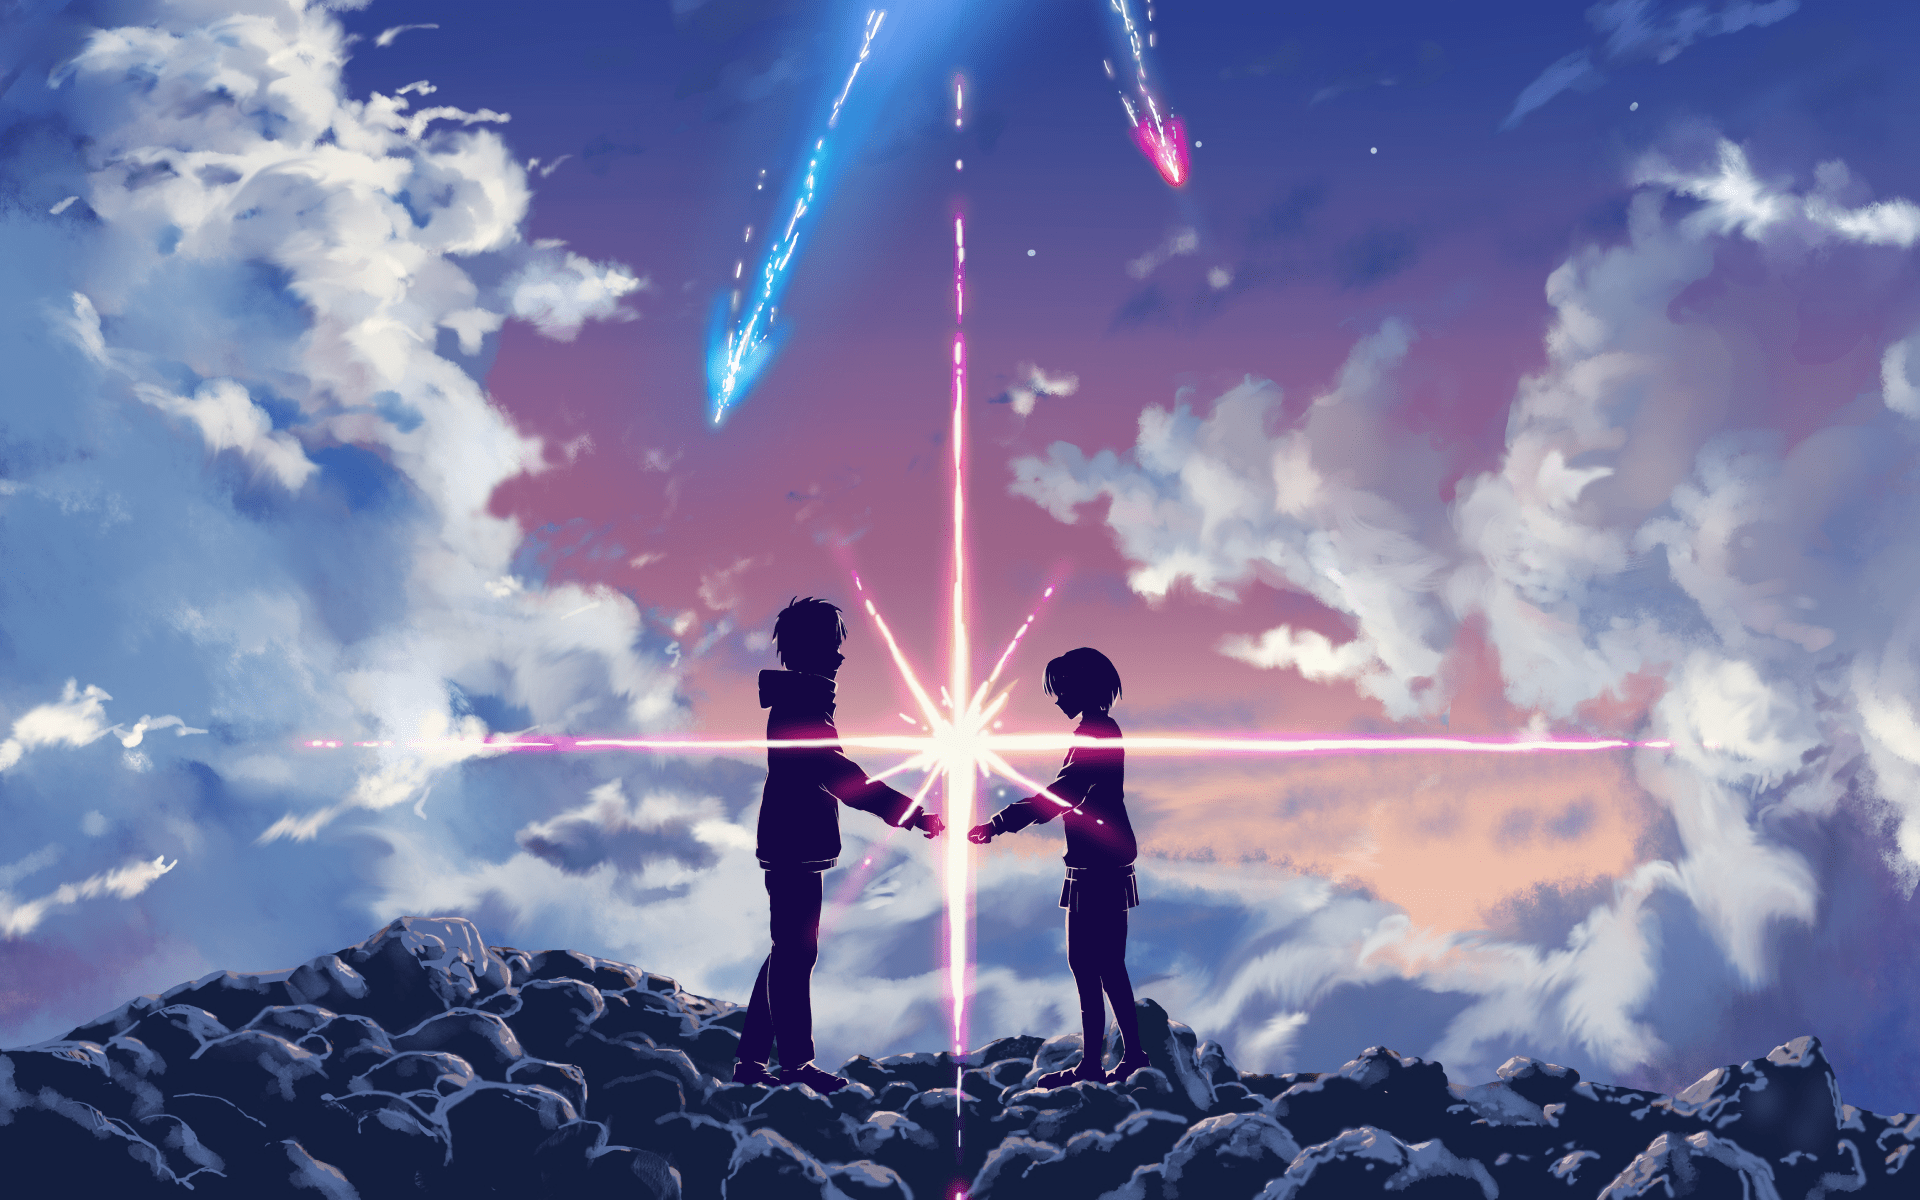 Two characters from the anime film 'Your Name' standing on a hill with a star in the background - 1920x1200